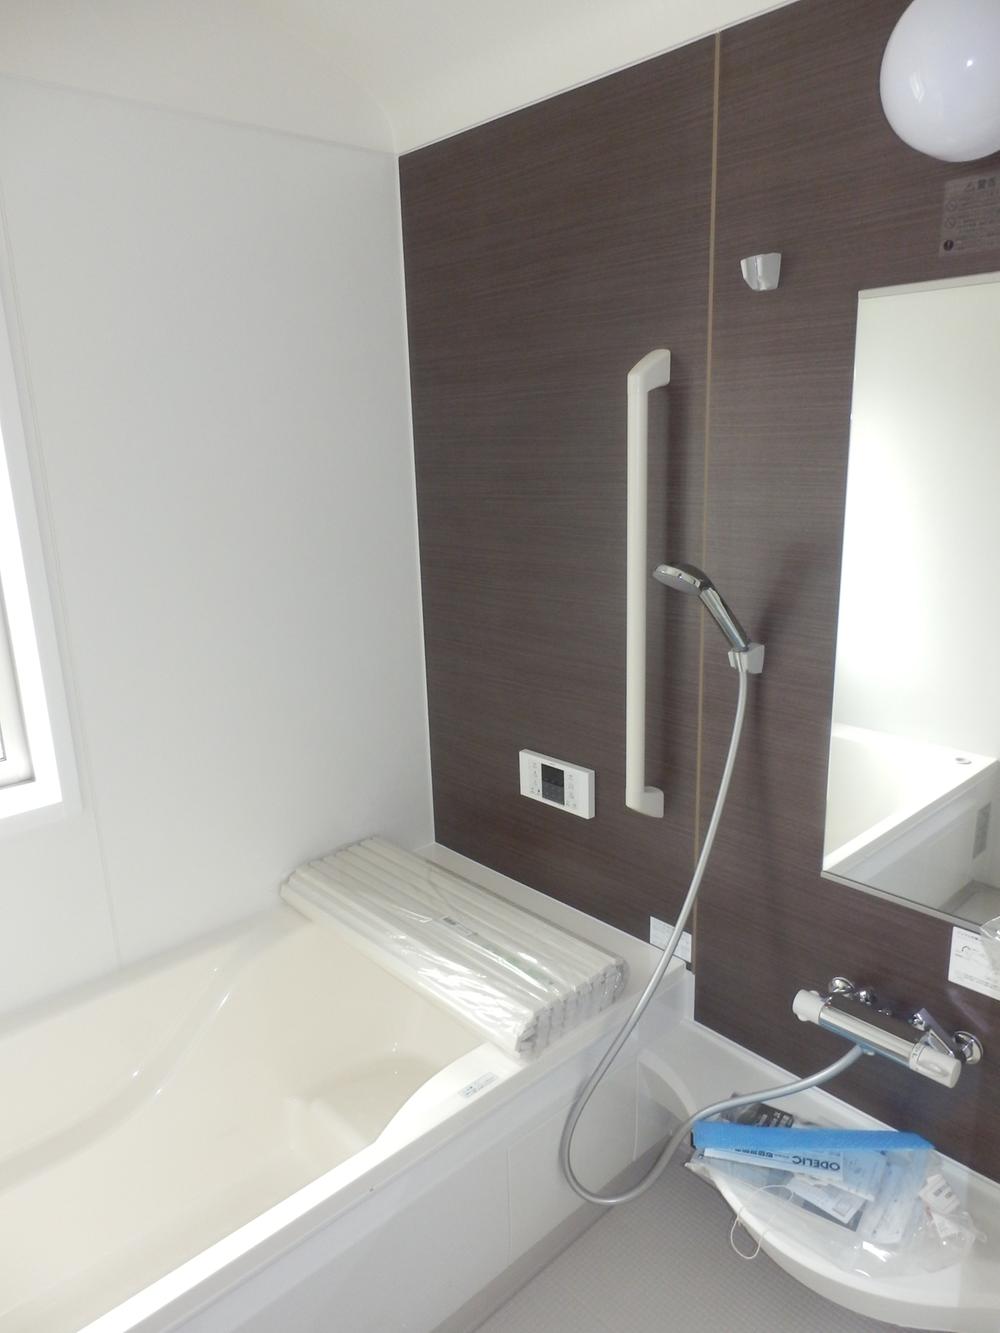 Same specifications photo (bathroom). Unit is a bus. It is stuck in a relaxed manner in one tsubo type. Please heal daily fatigue! ! 